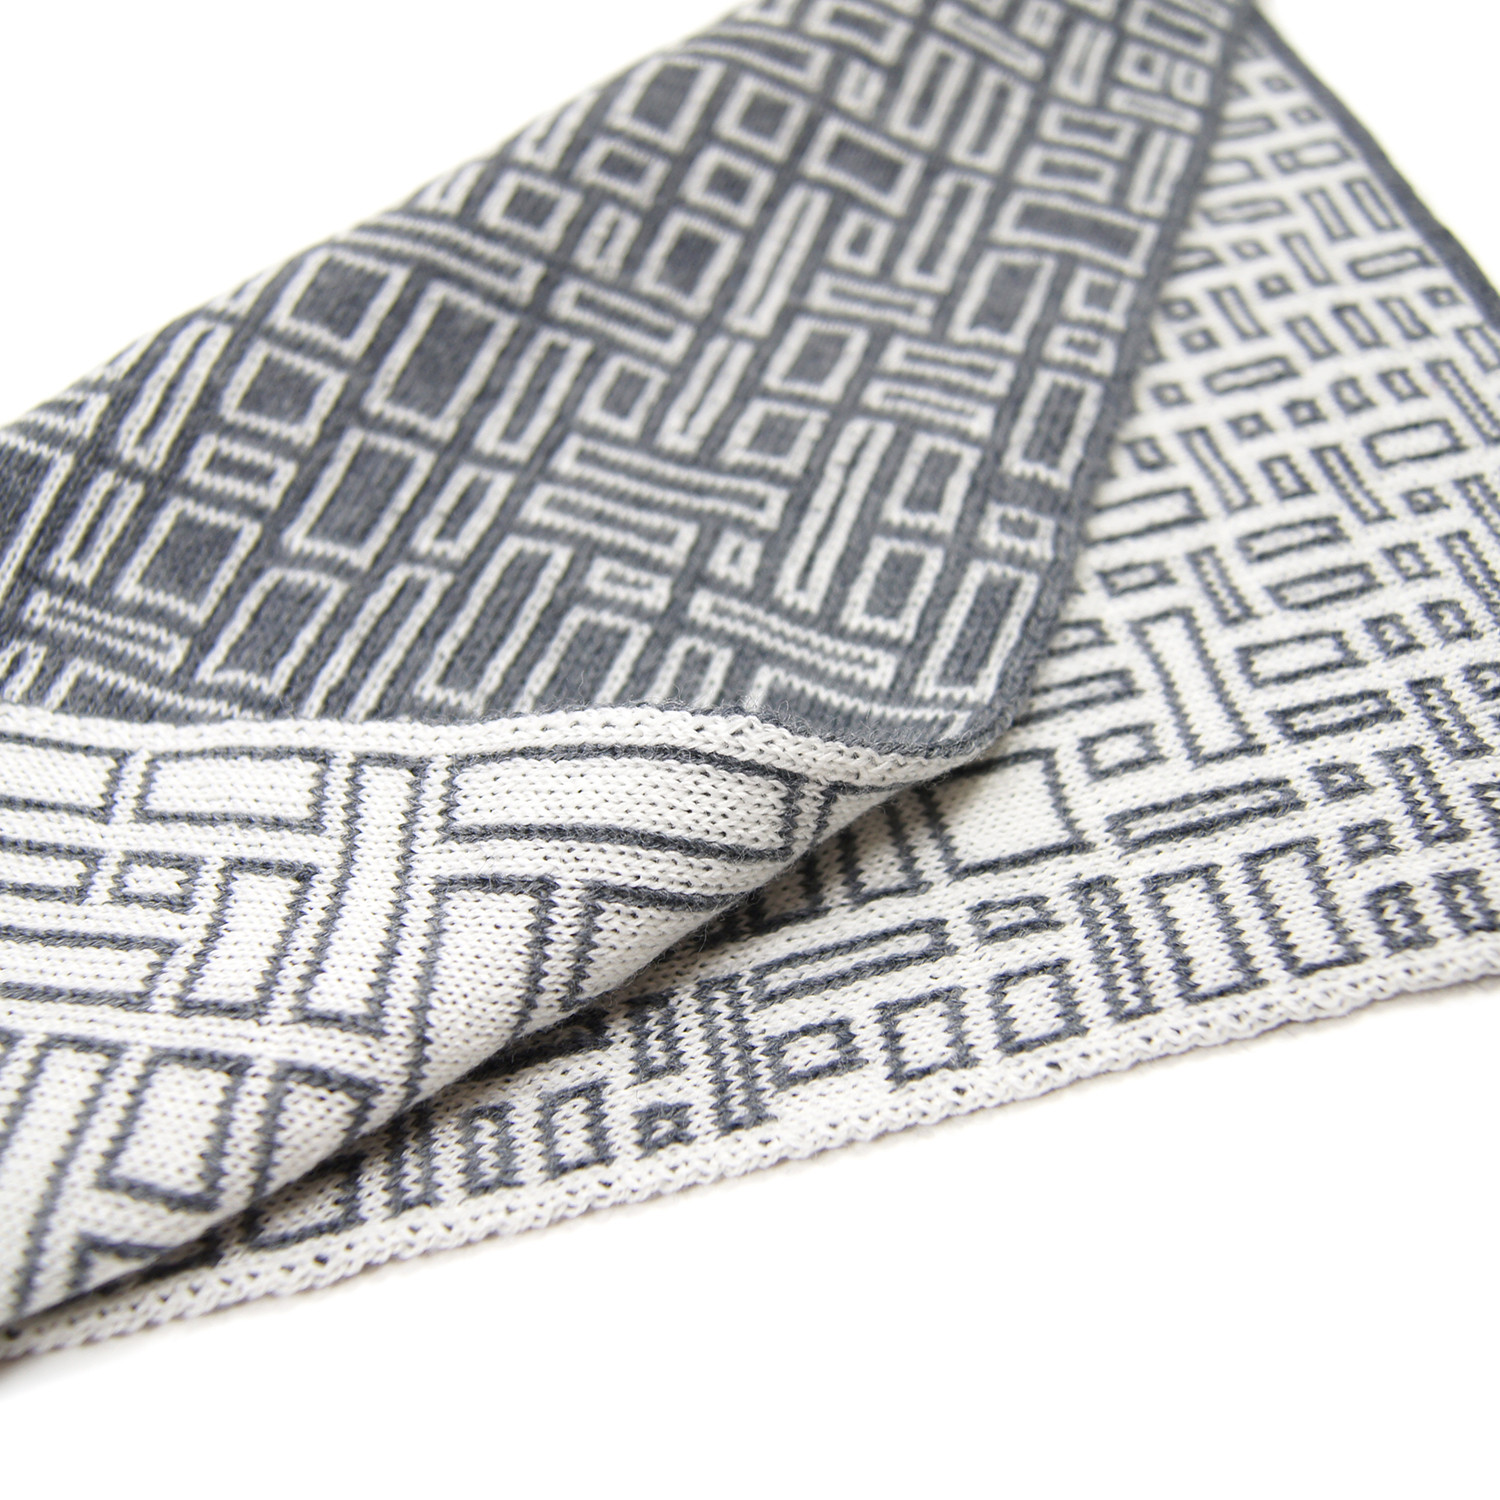 print thesis on scarf